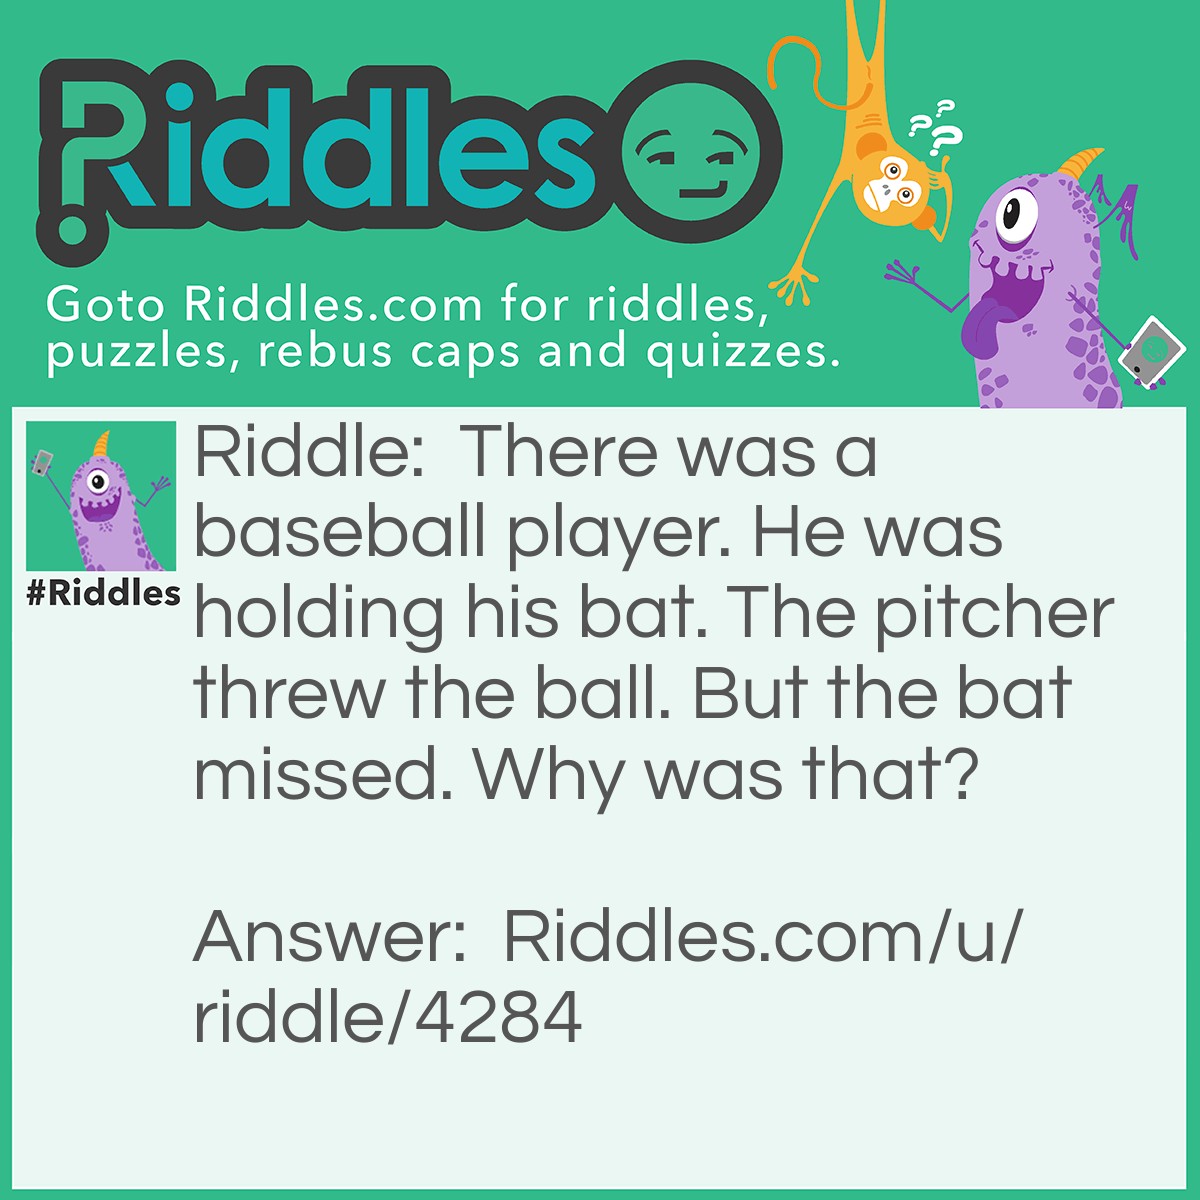 Riddle: There was a baseball player. He was holding his bat. The pitcher threw the ball. But the bat missed. Why was that? Answer: It was an animal Bat and the bat couldn't see.